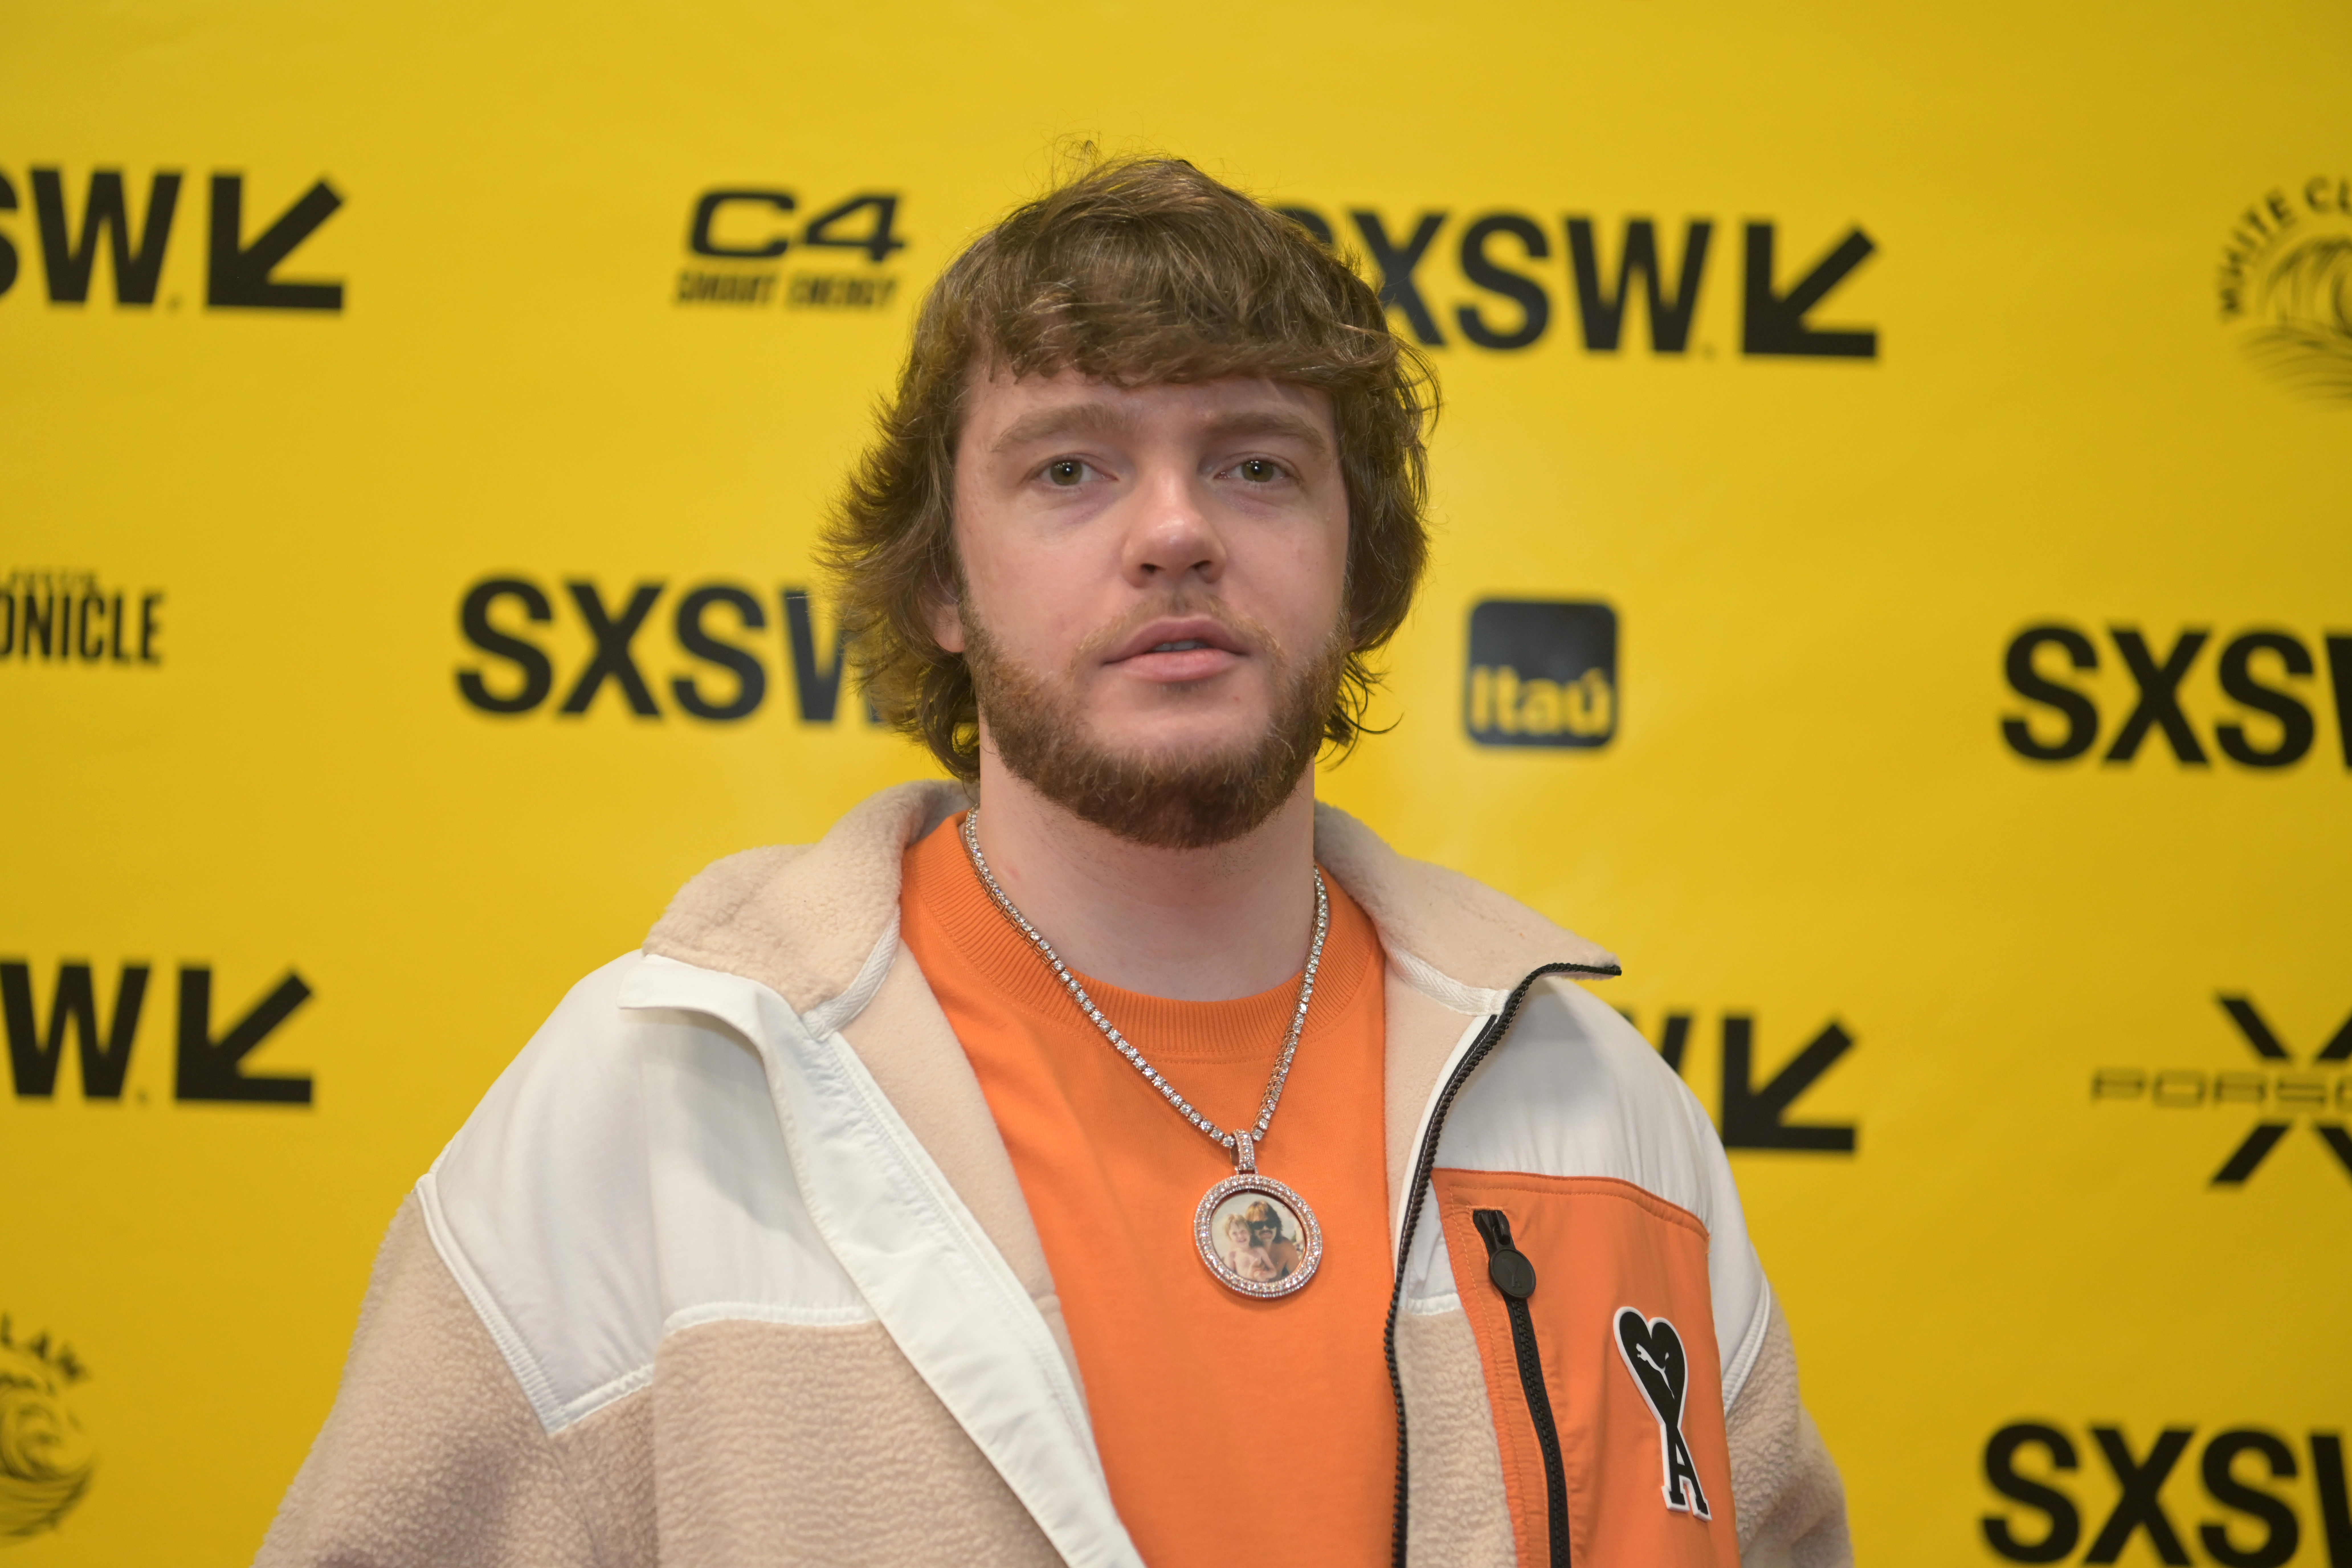 Murda Beatz at the 2023 SXSW Conference and Festivals in Austin, Texas. | Source: Getty Images